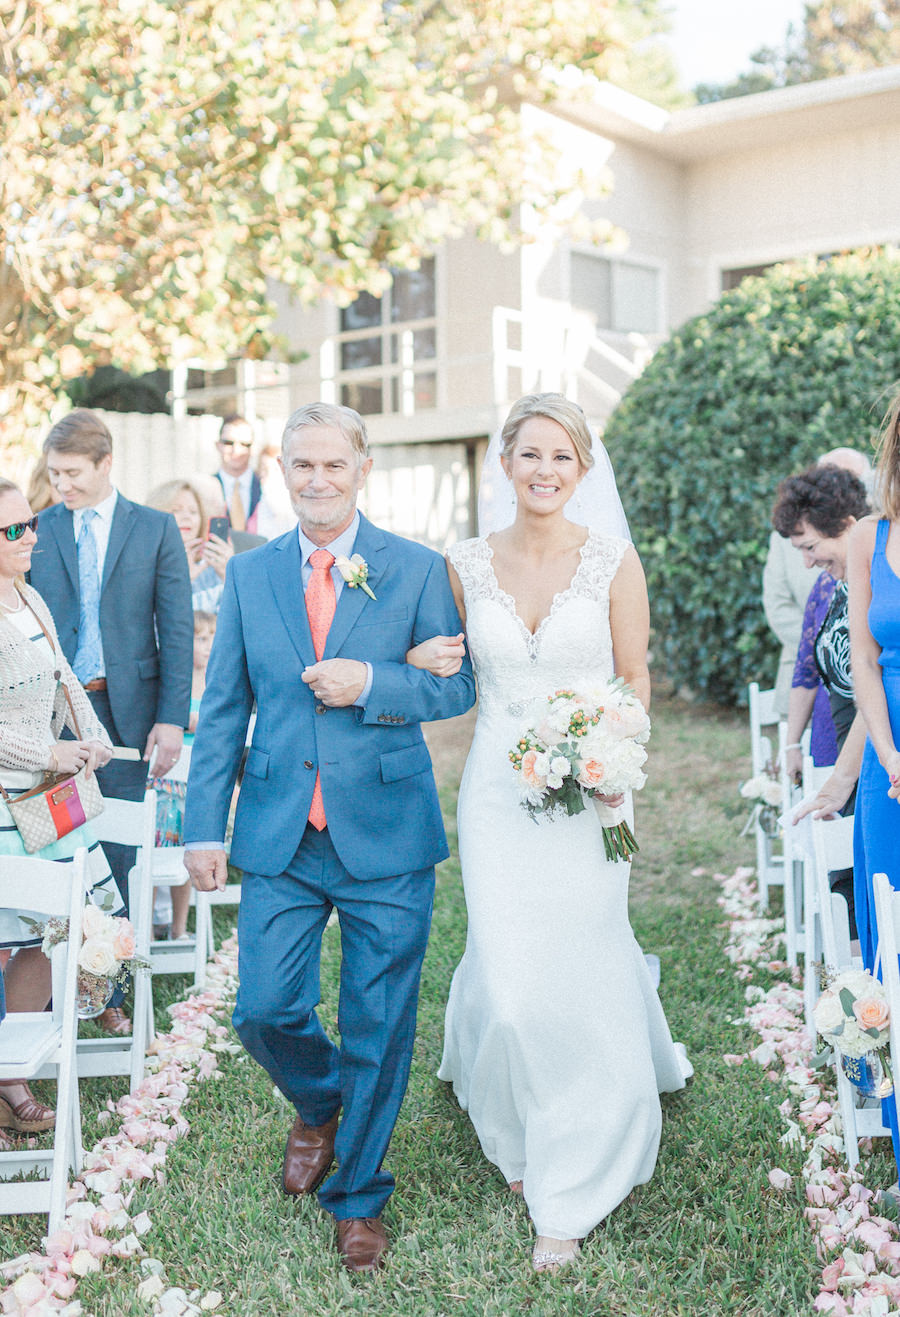 Dad and Bride Walking Down the Aisle at Outdoor Florida Wedding Ceremony